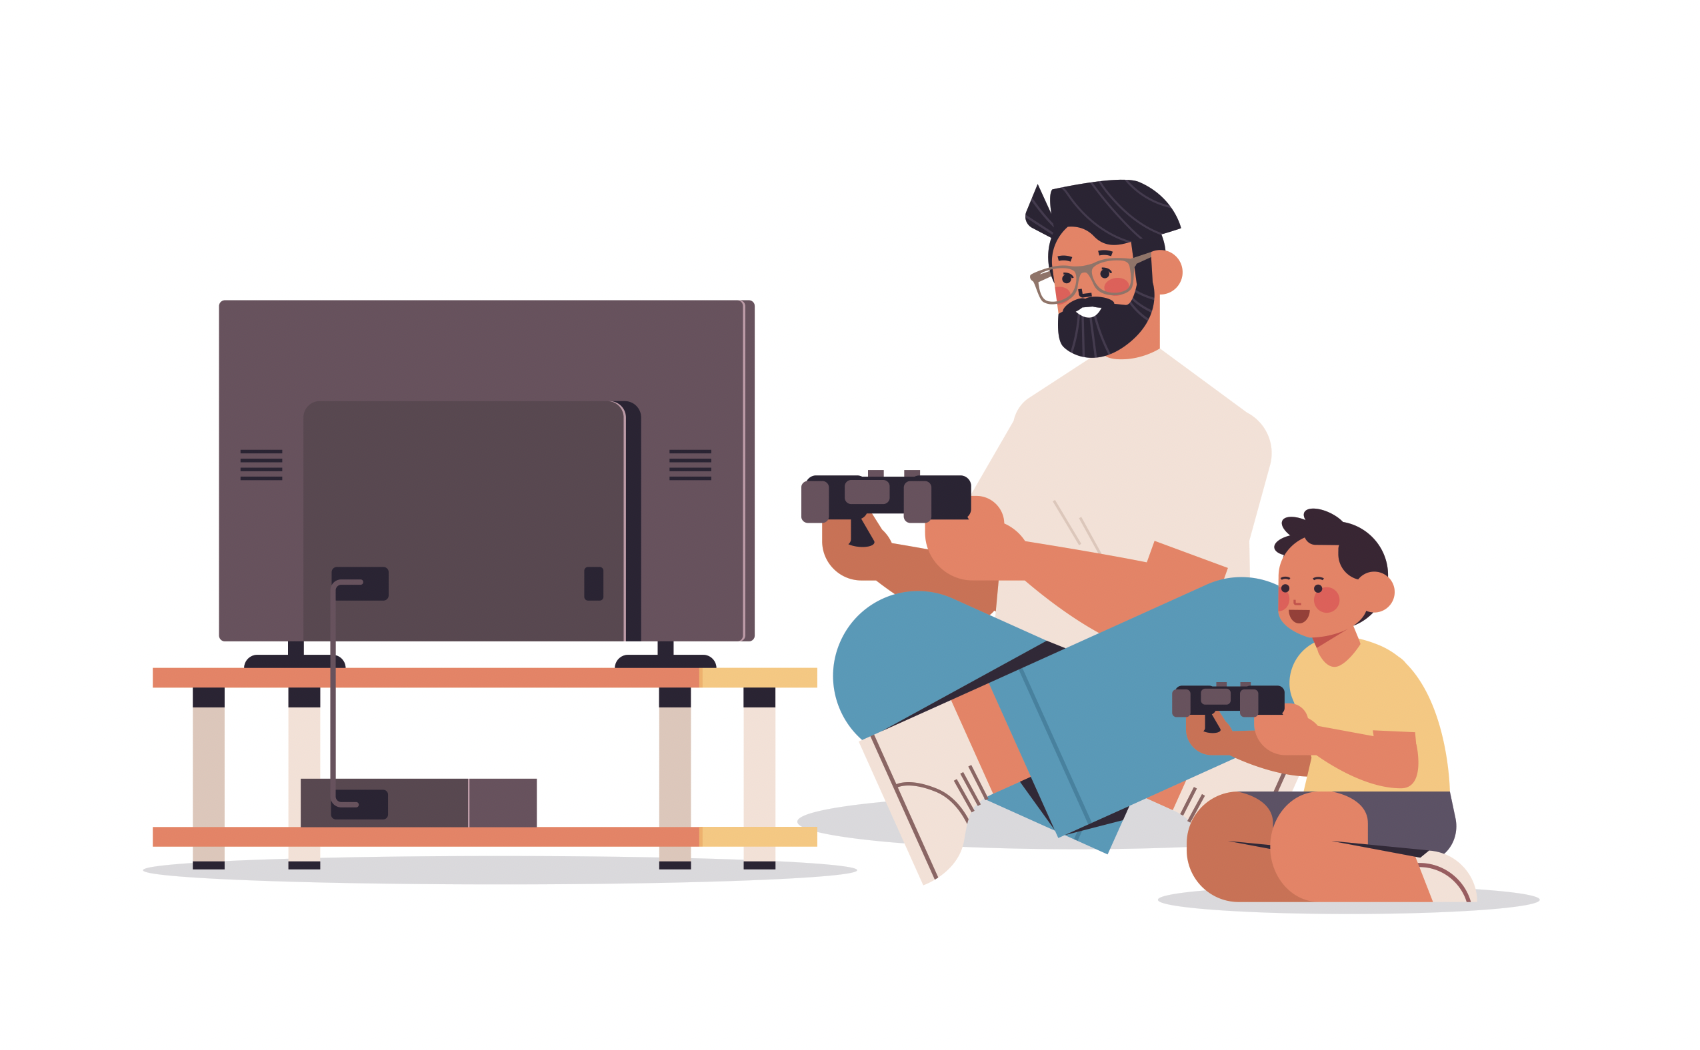 Travel troubleshooter kid and father playing video game